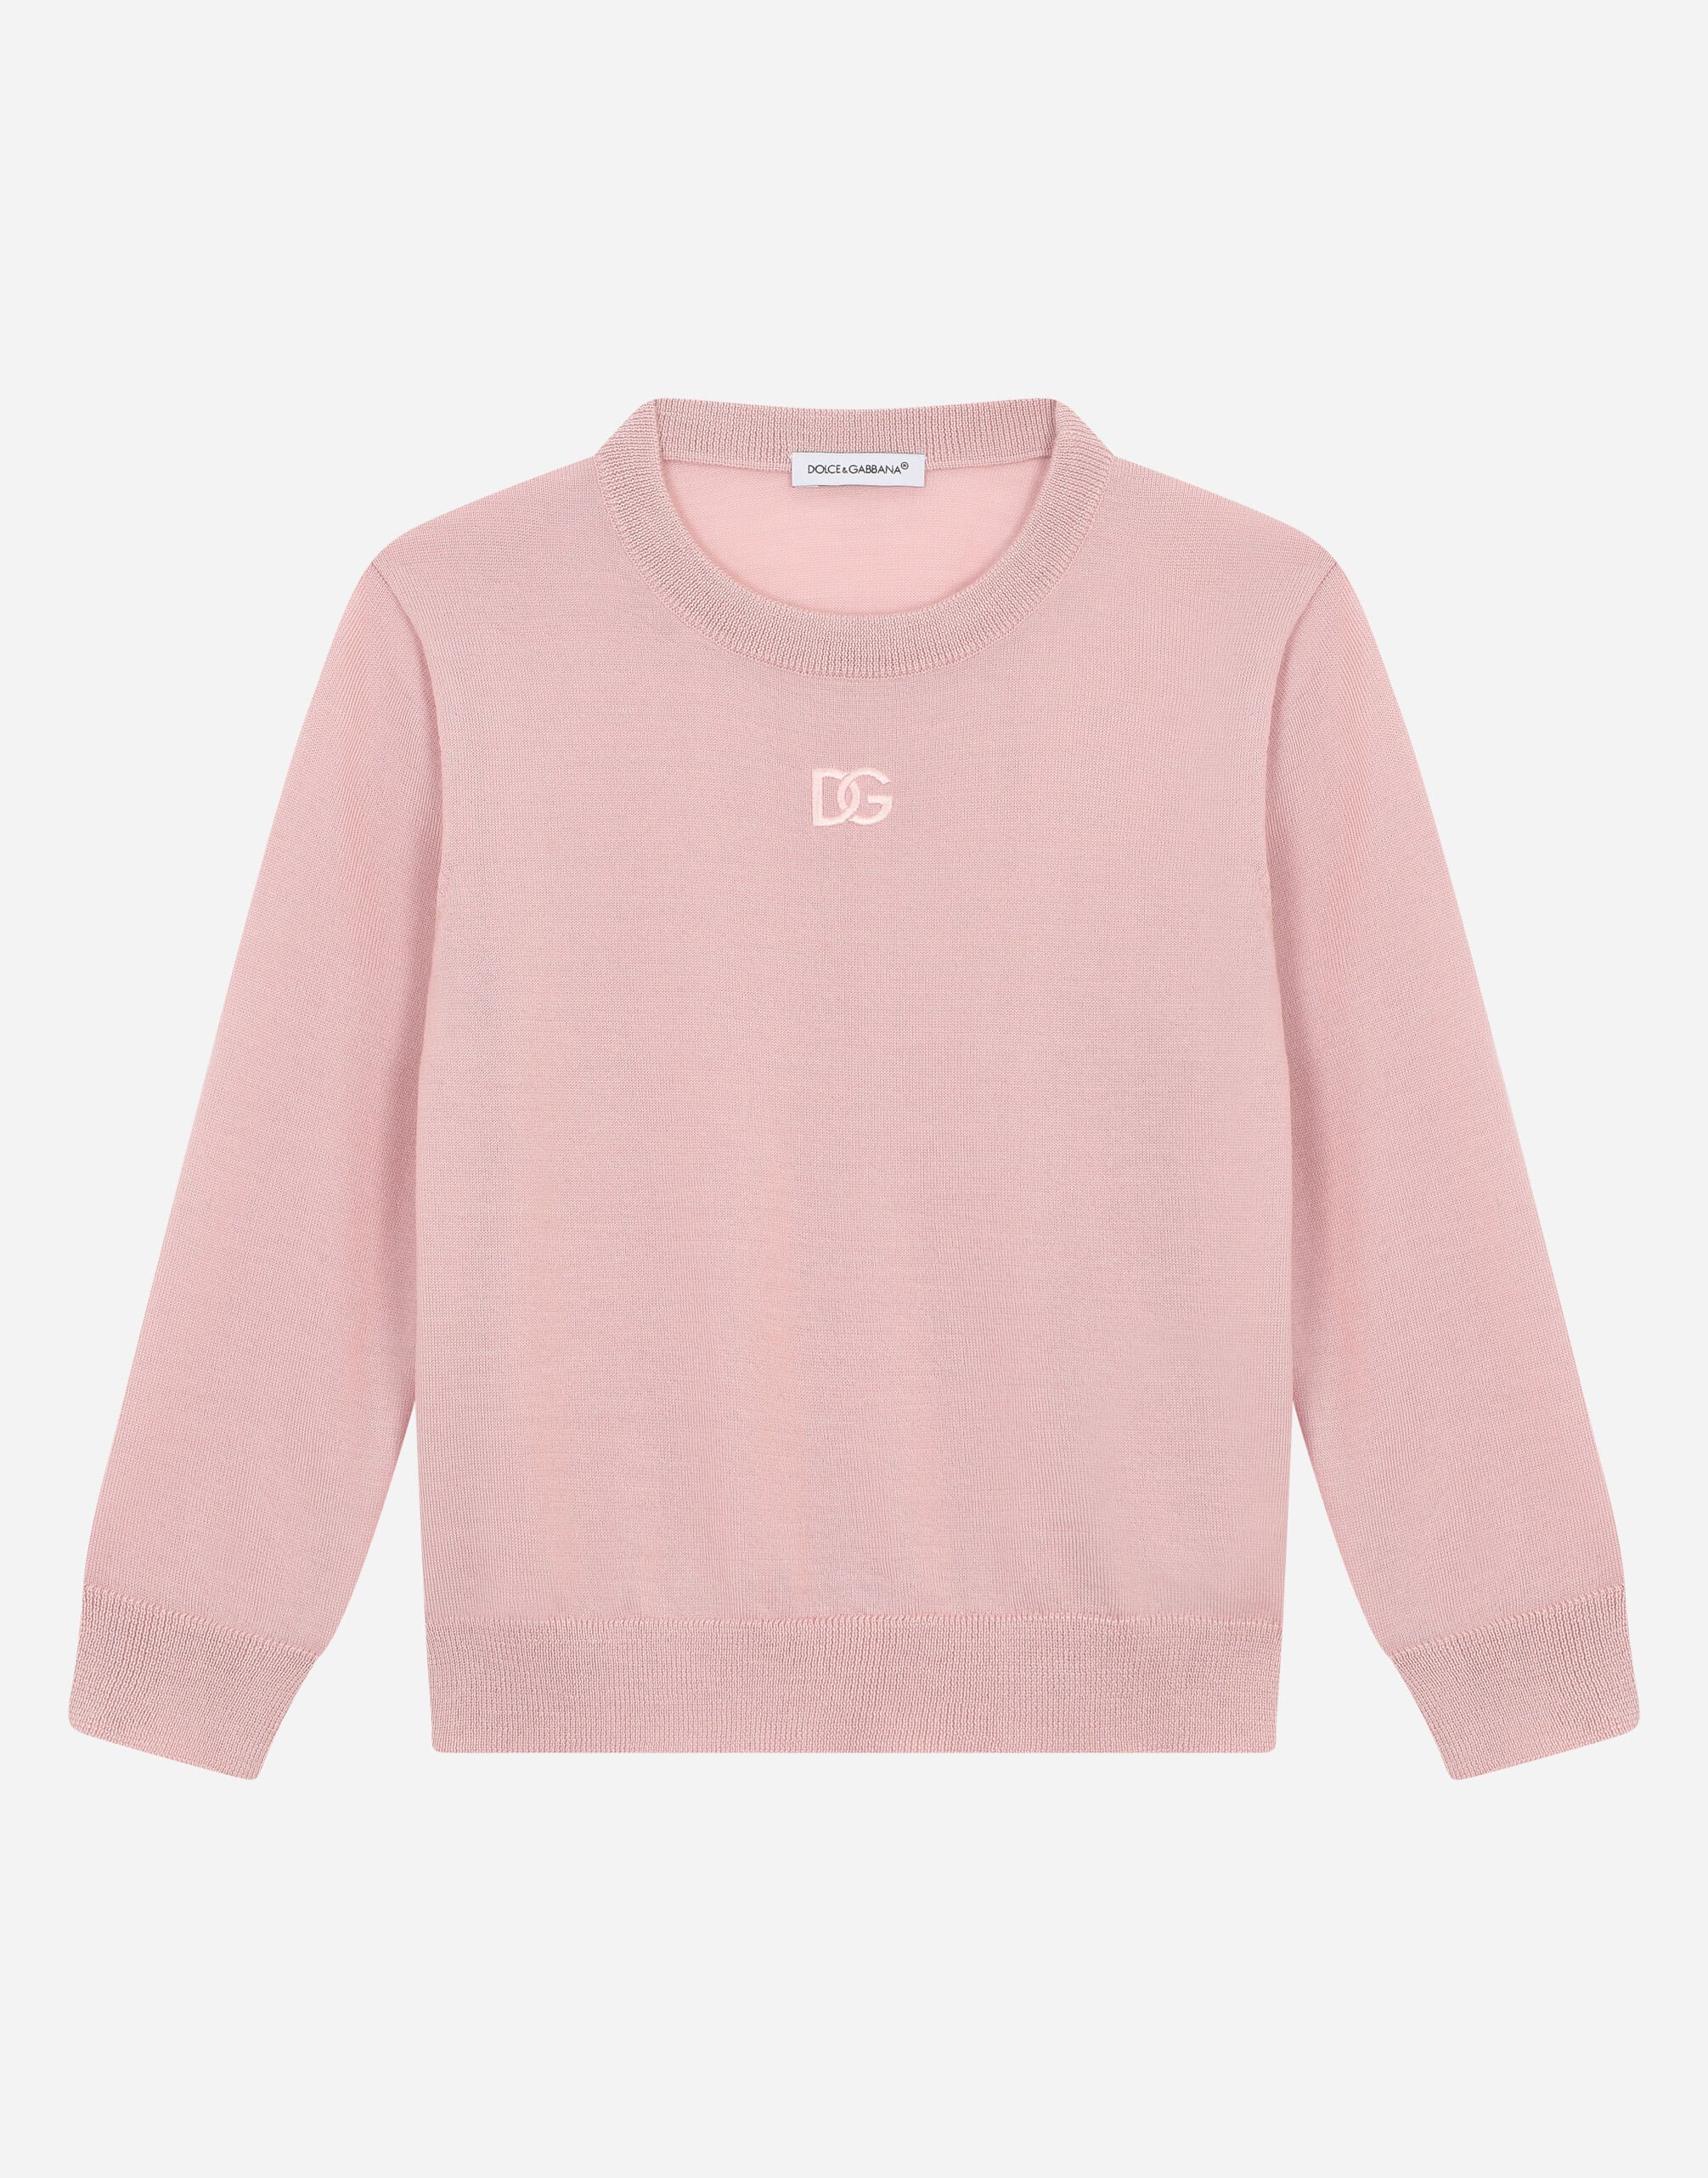 Dolce & Gabbana Cashmere round-neck sweater with DG logo embroidery Pink L5JTKEG7F9G